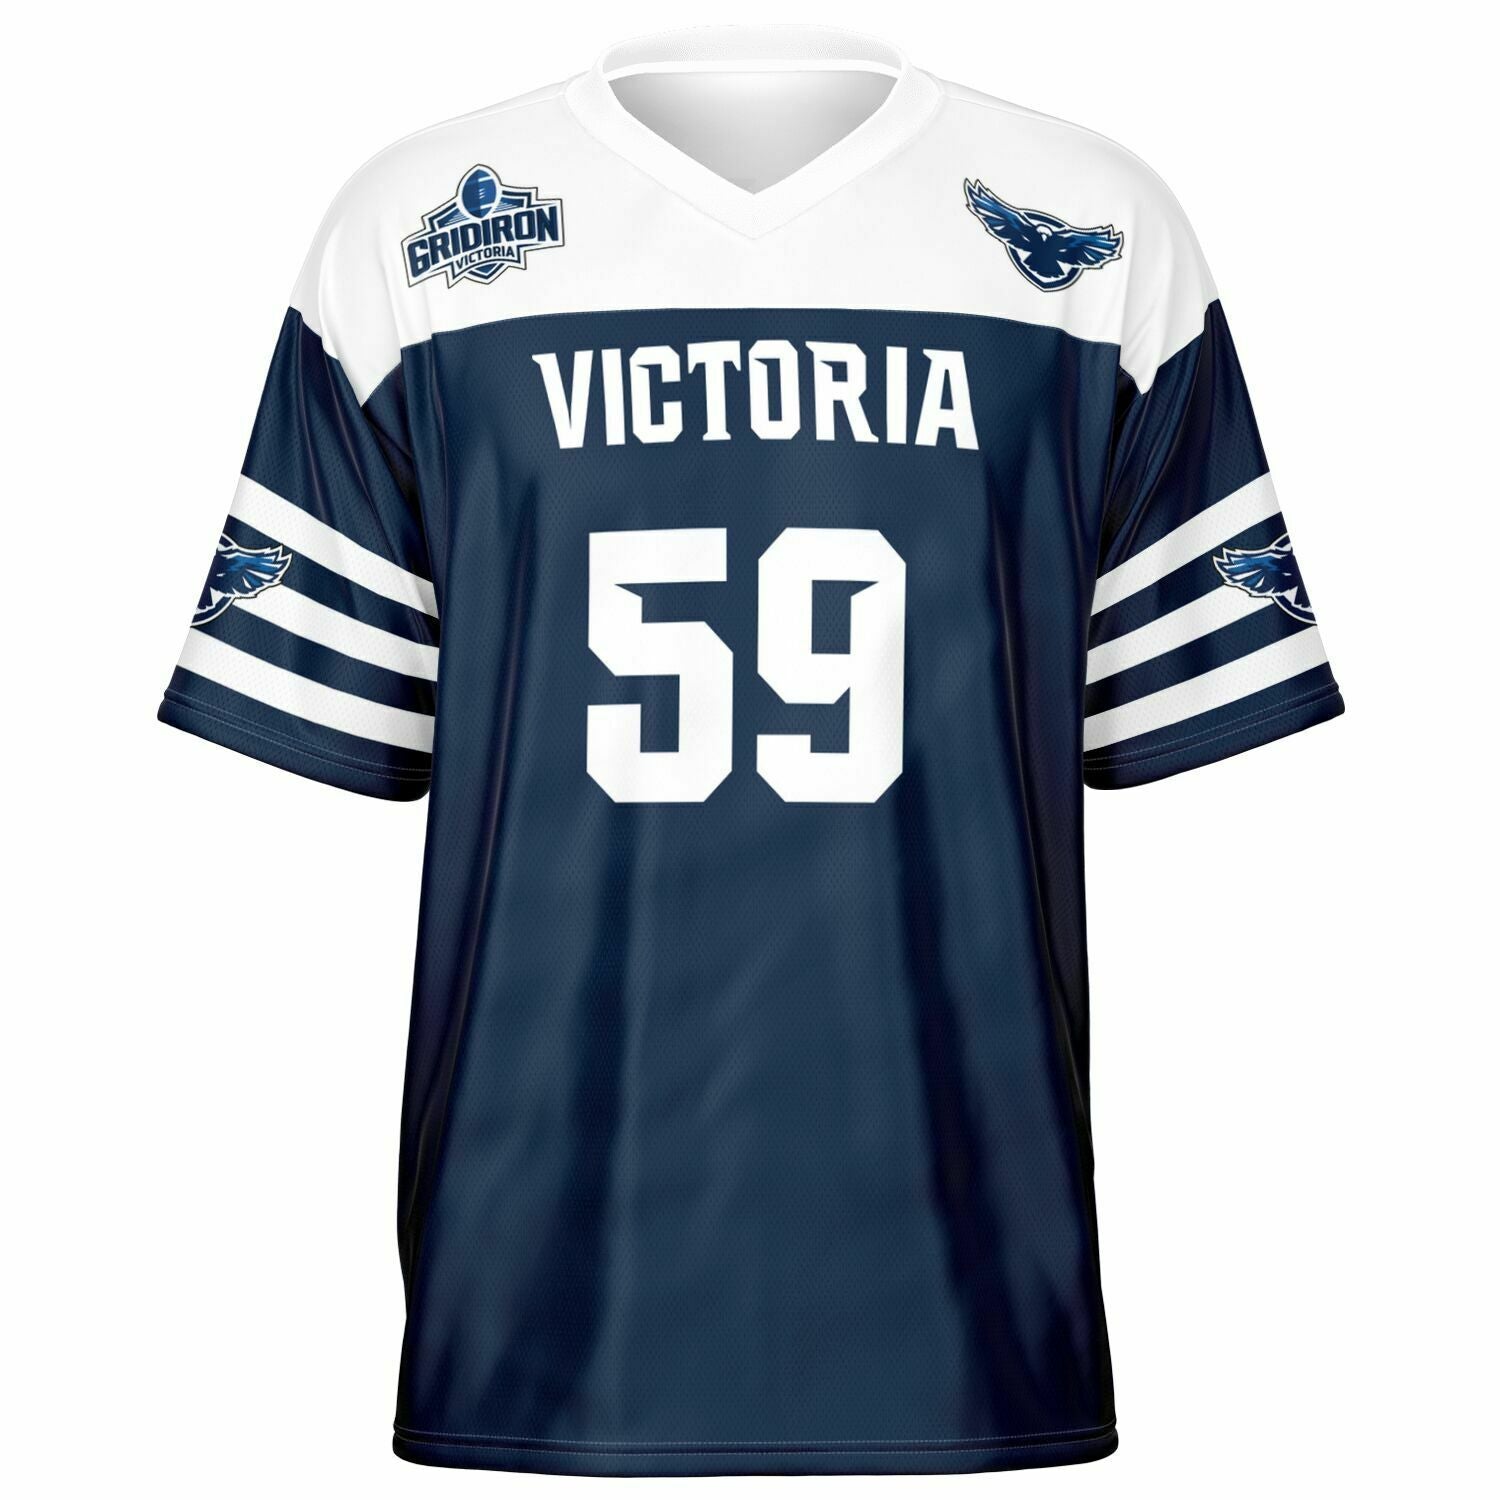 Gridiron Vic Supporters